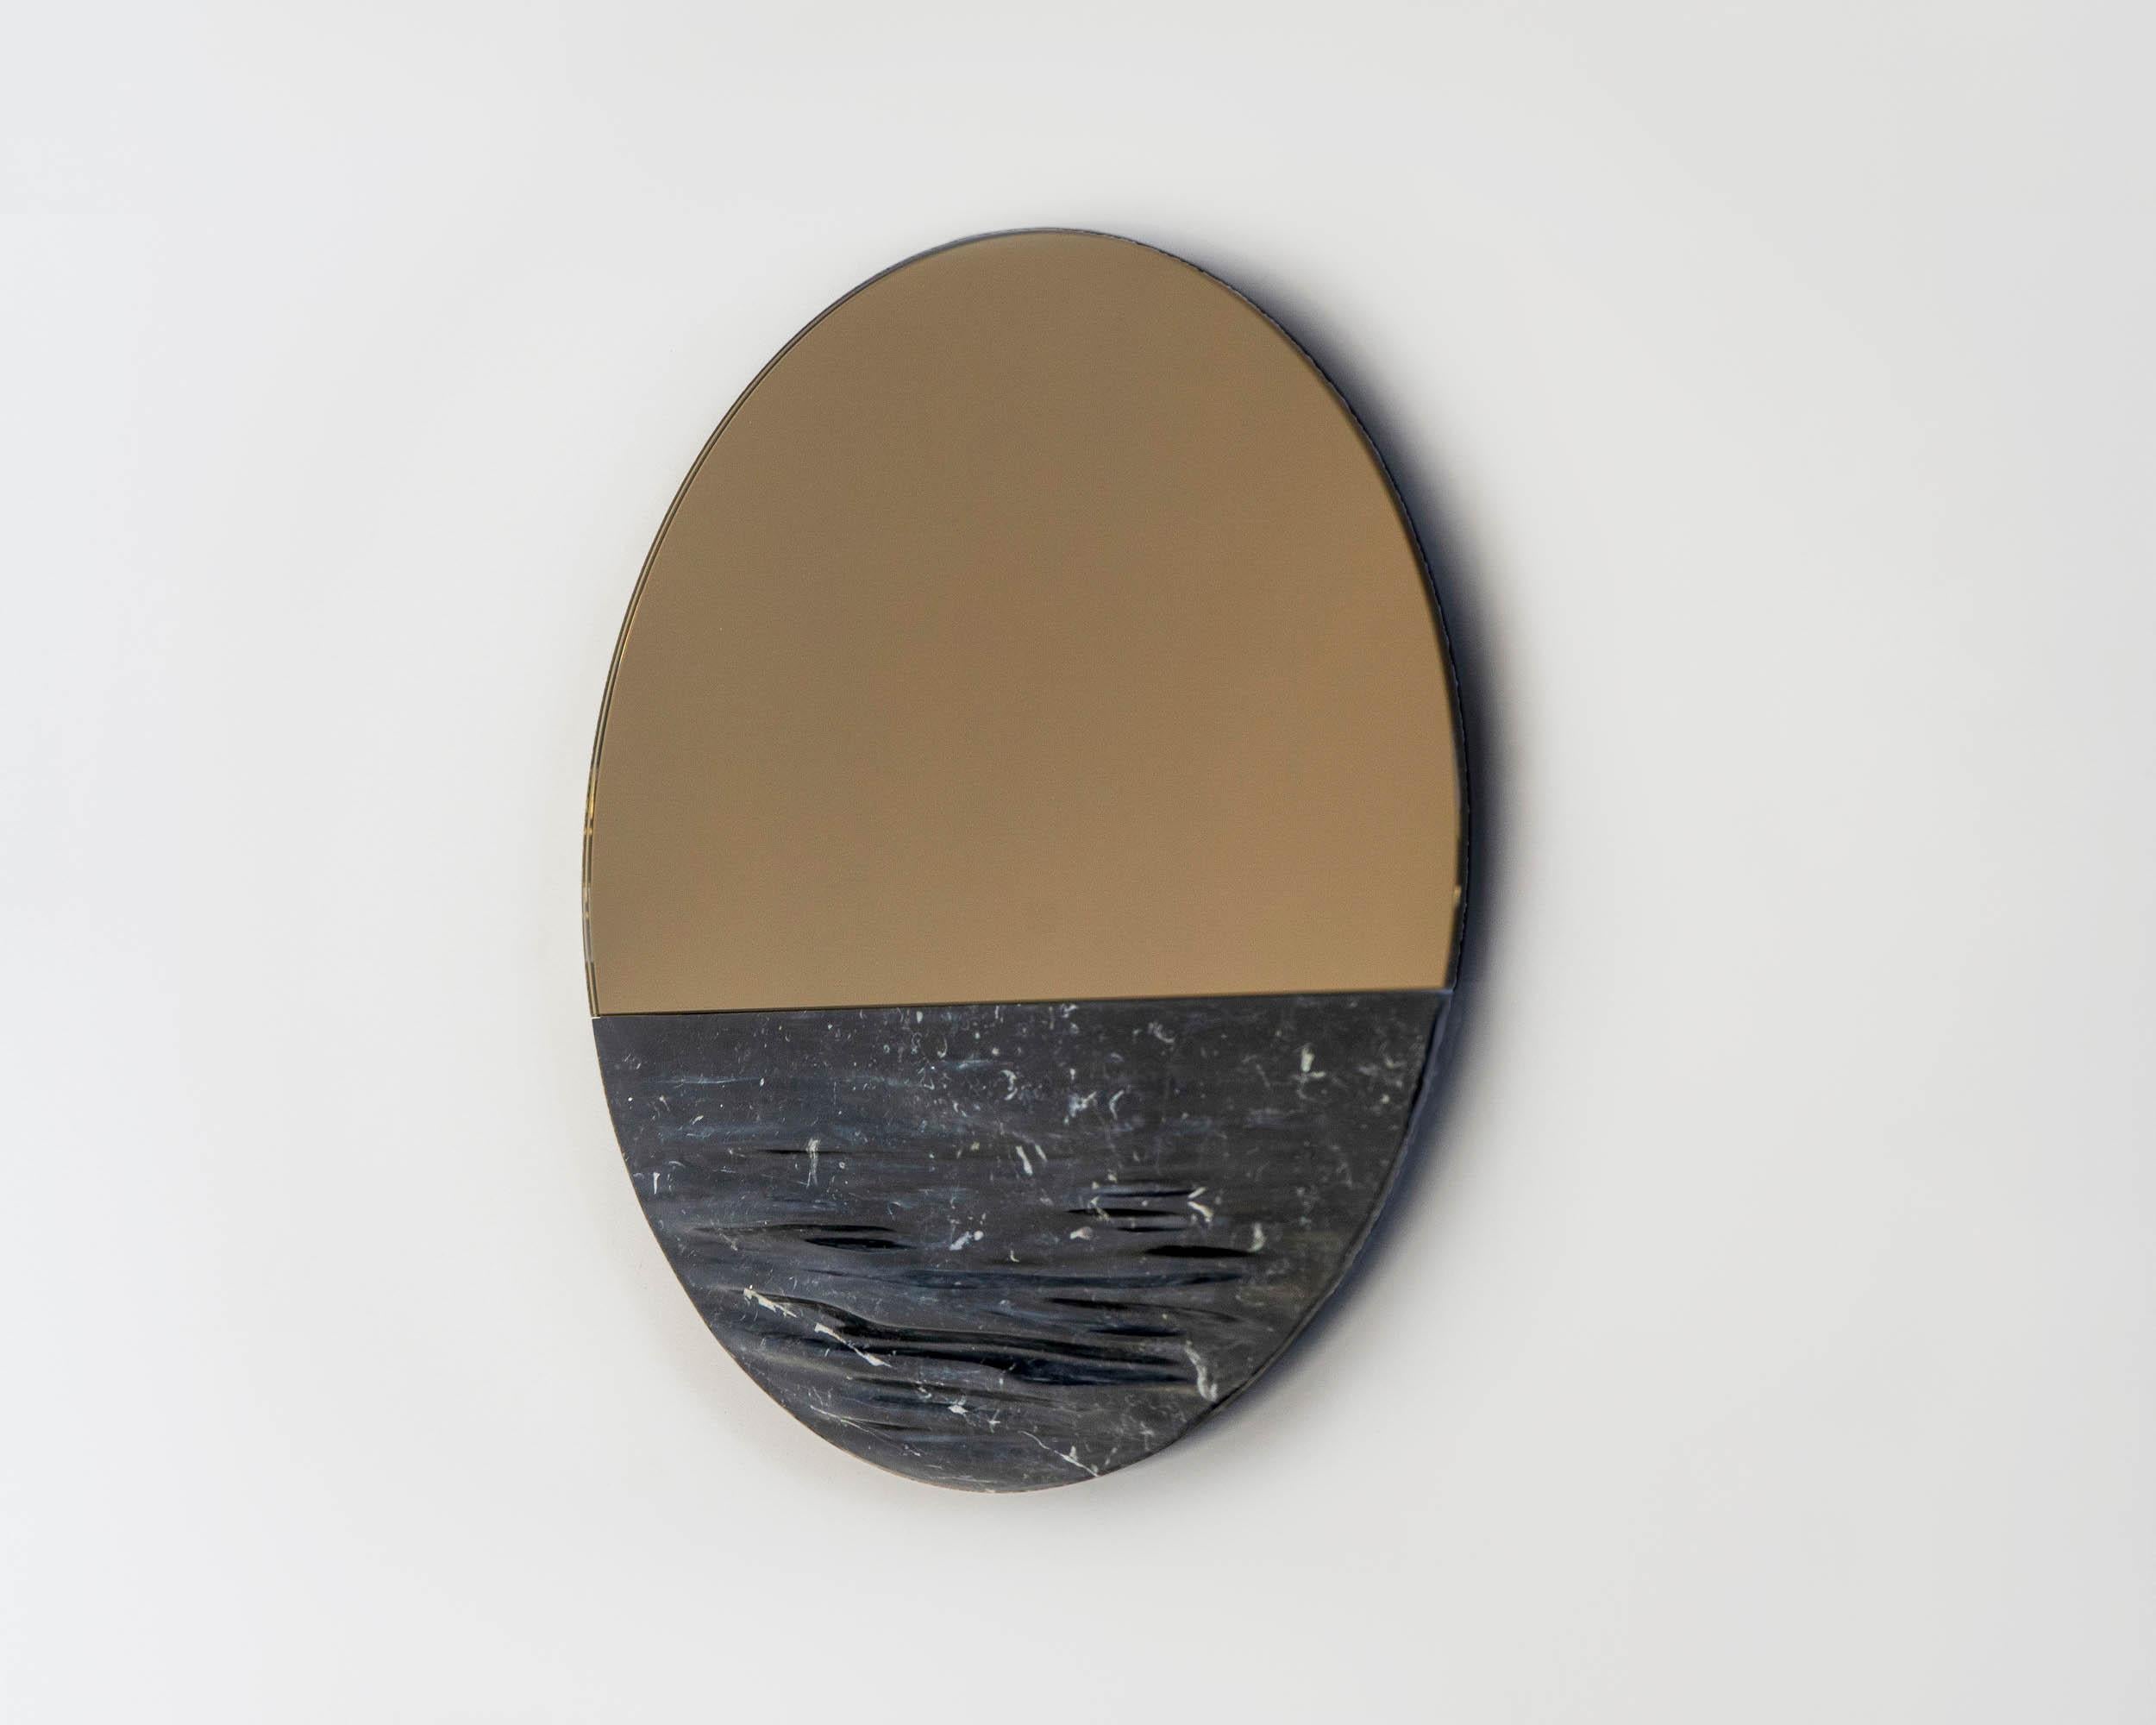 Orizon Blacksea
Round mirror signed by Ocrùm 

Dimensions: 31.5 x 1.75 in
Materials: Carved marble, glass mirror
Colors: Marquina black, bronze / gray mirror
Customization: Glass tint, frame finish and size are customizable at an additional